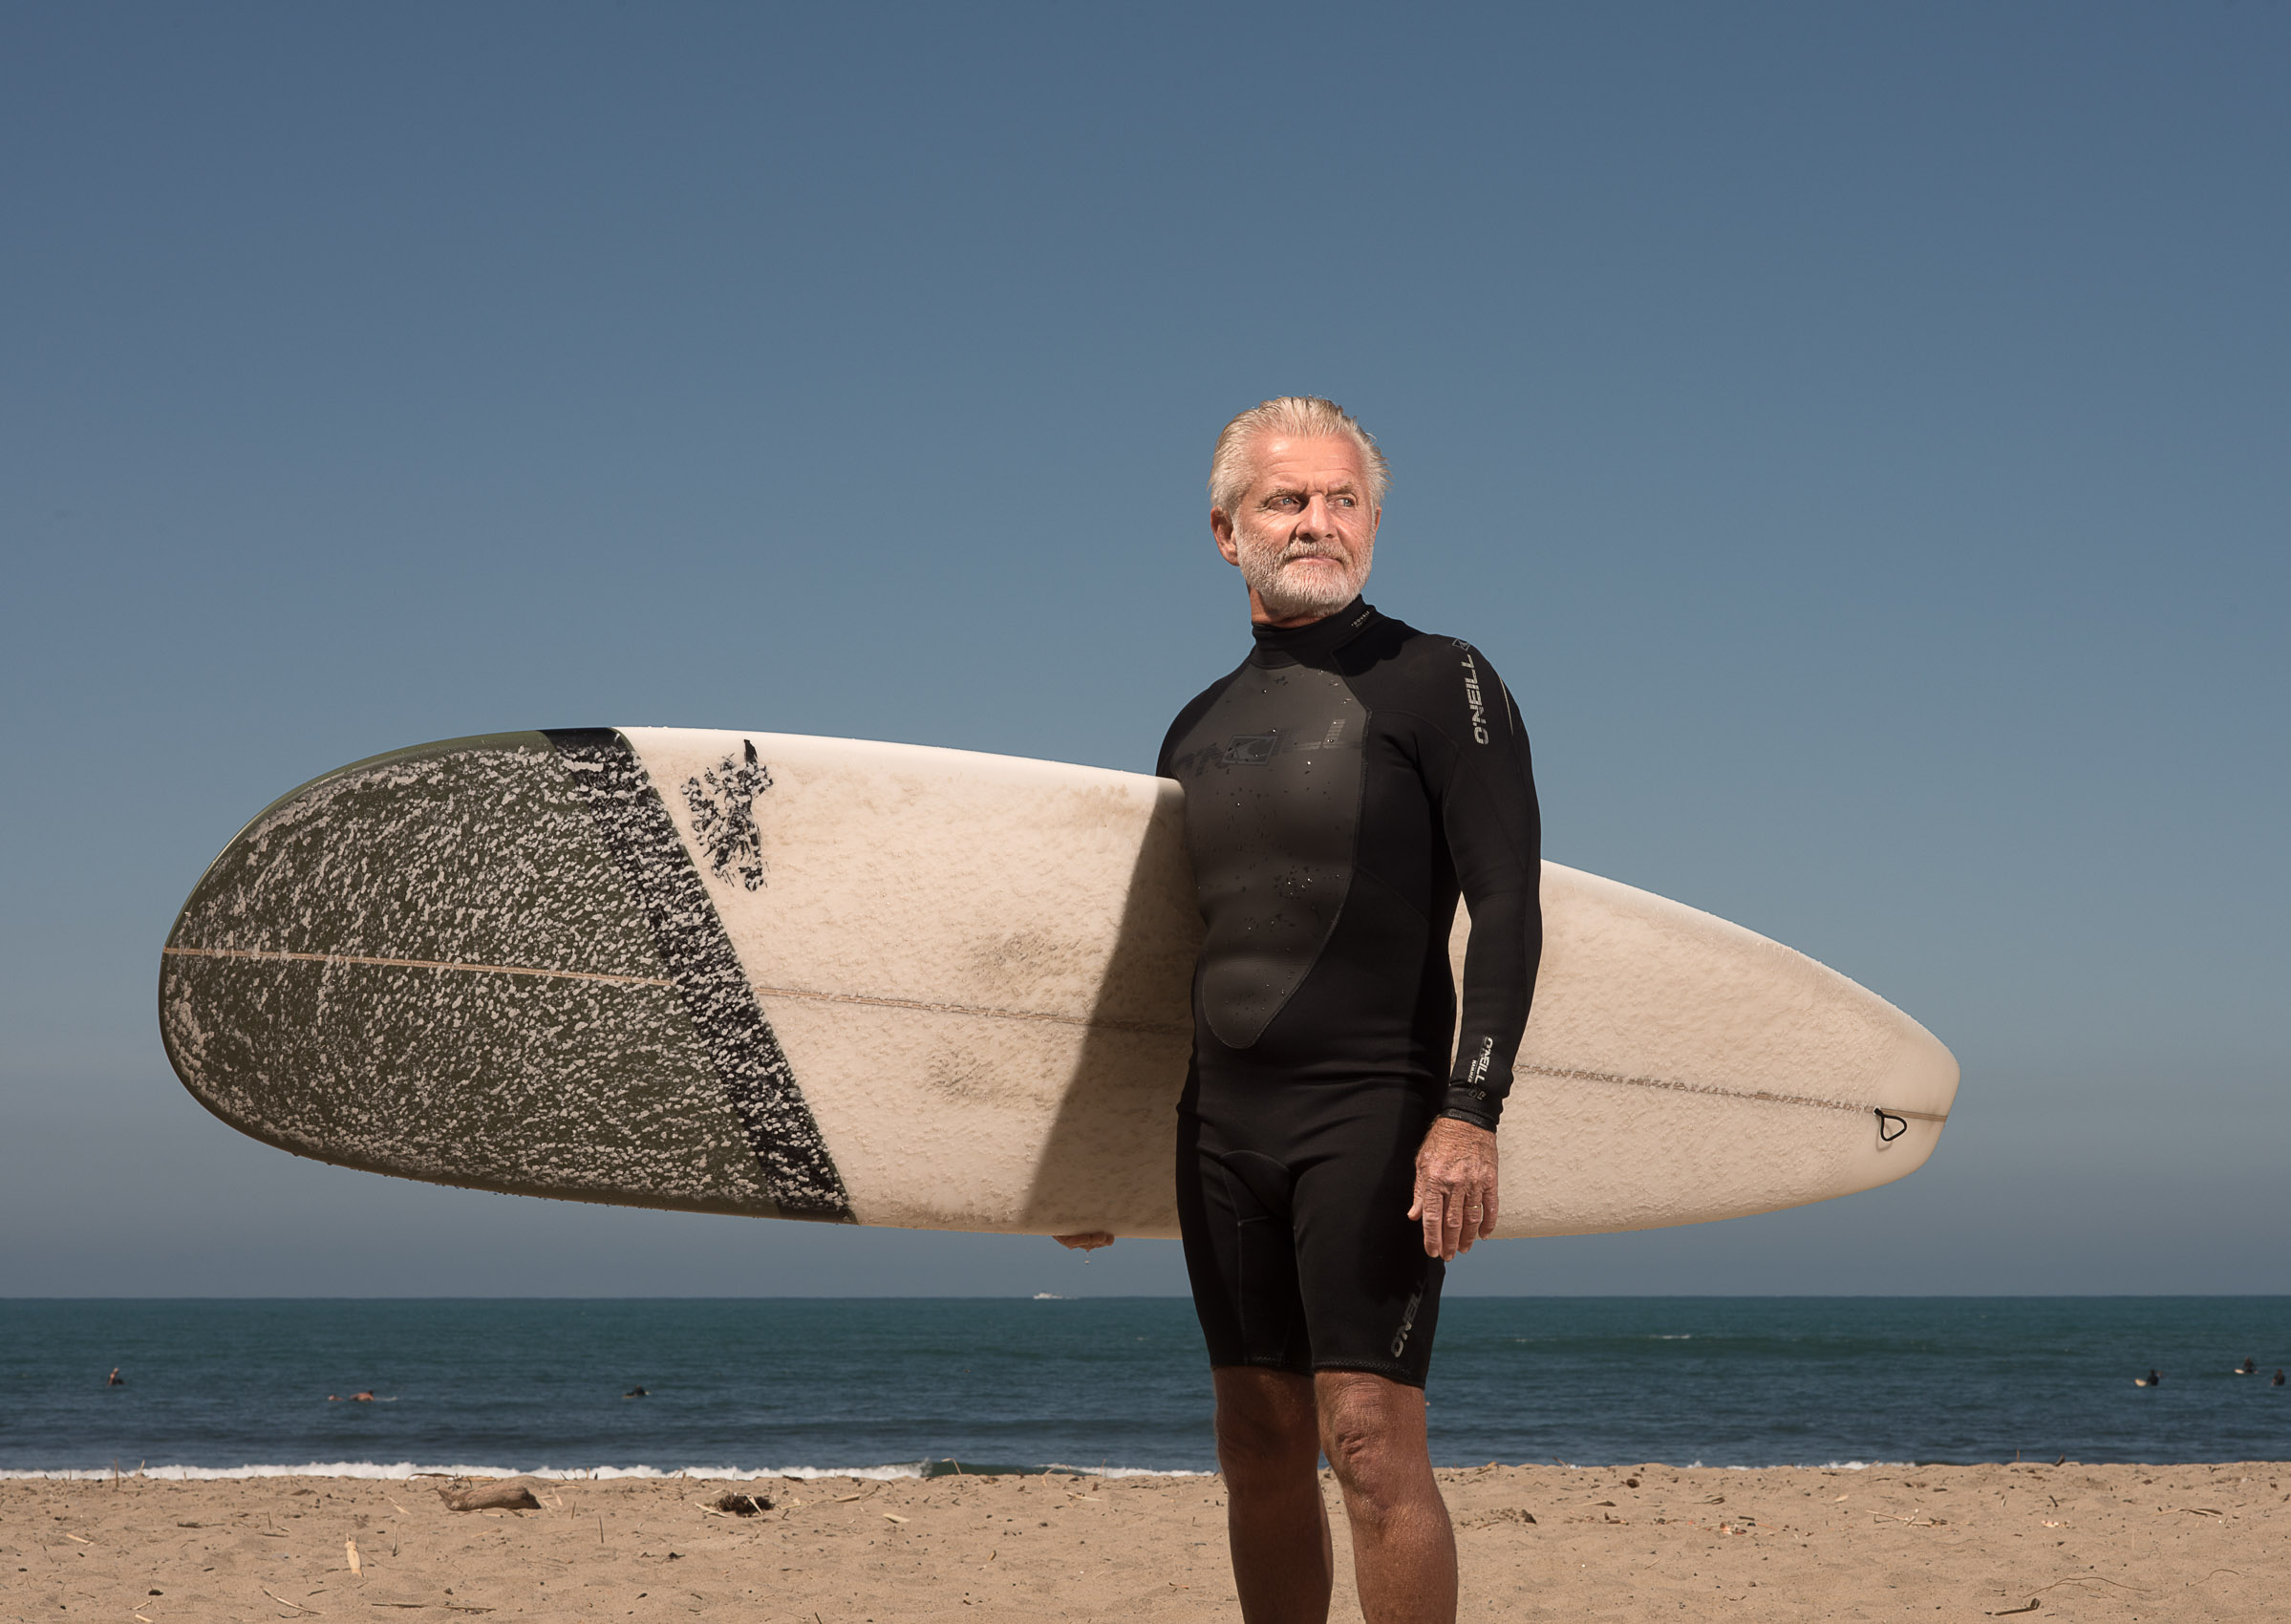 An older surfer poses for a portrait with his board at San Onofre State Beach.